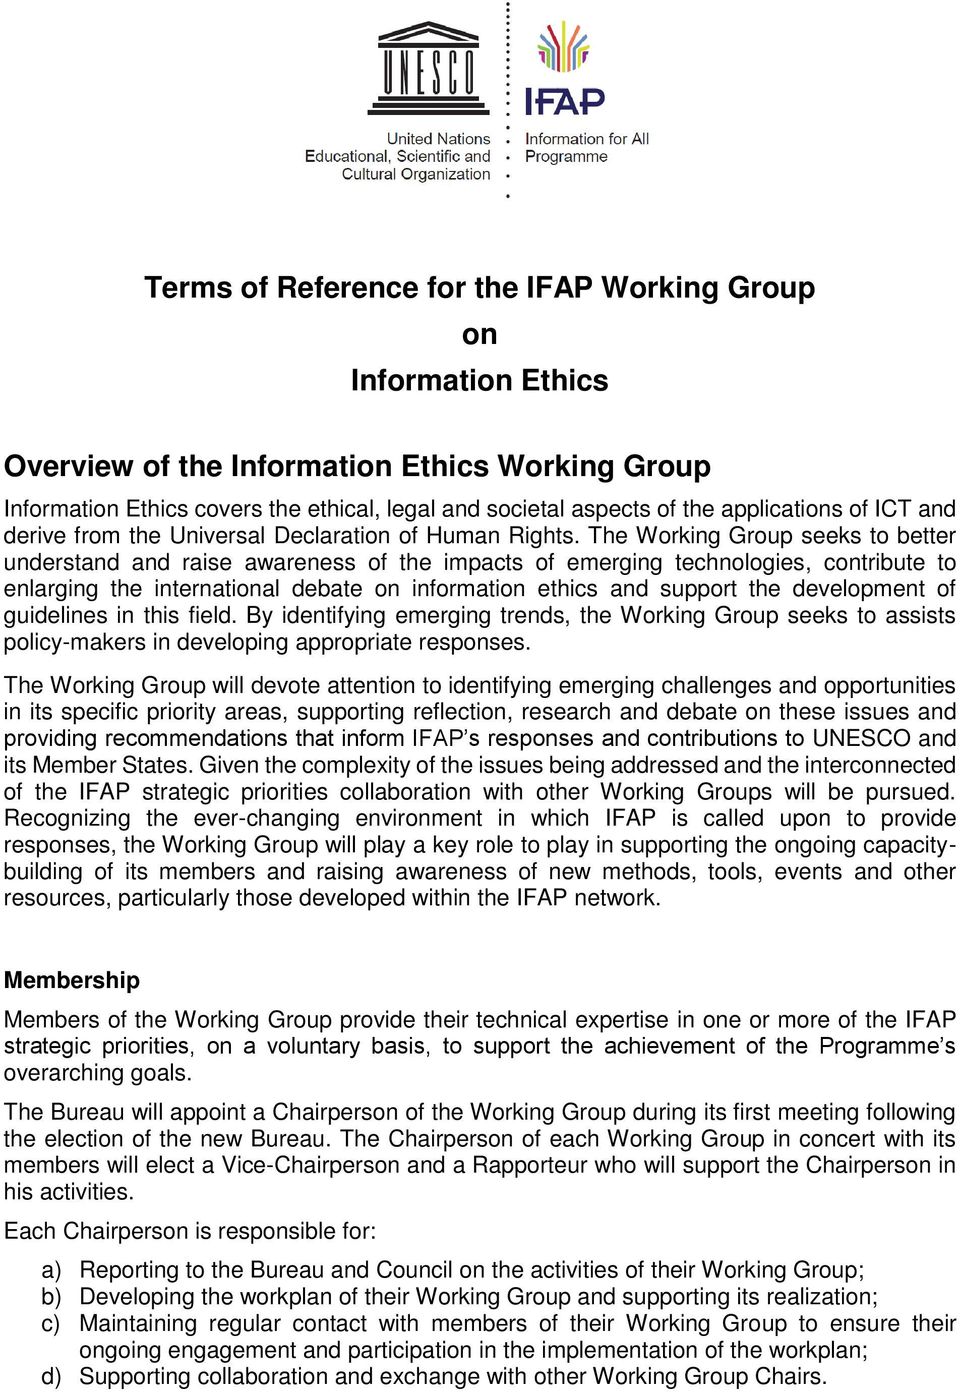 The Working Group seeks to better understand and raise awareness of the impacts of emerging technologies, contribute to enlarging the international debate on information ethics and support the